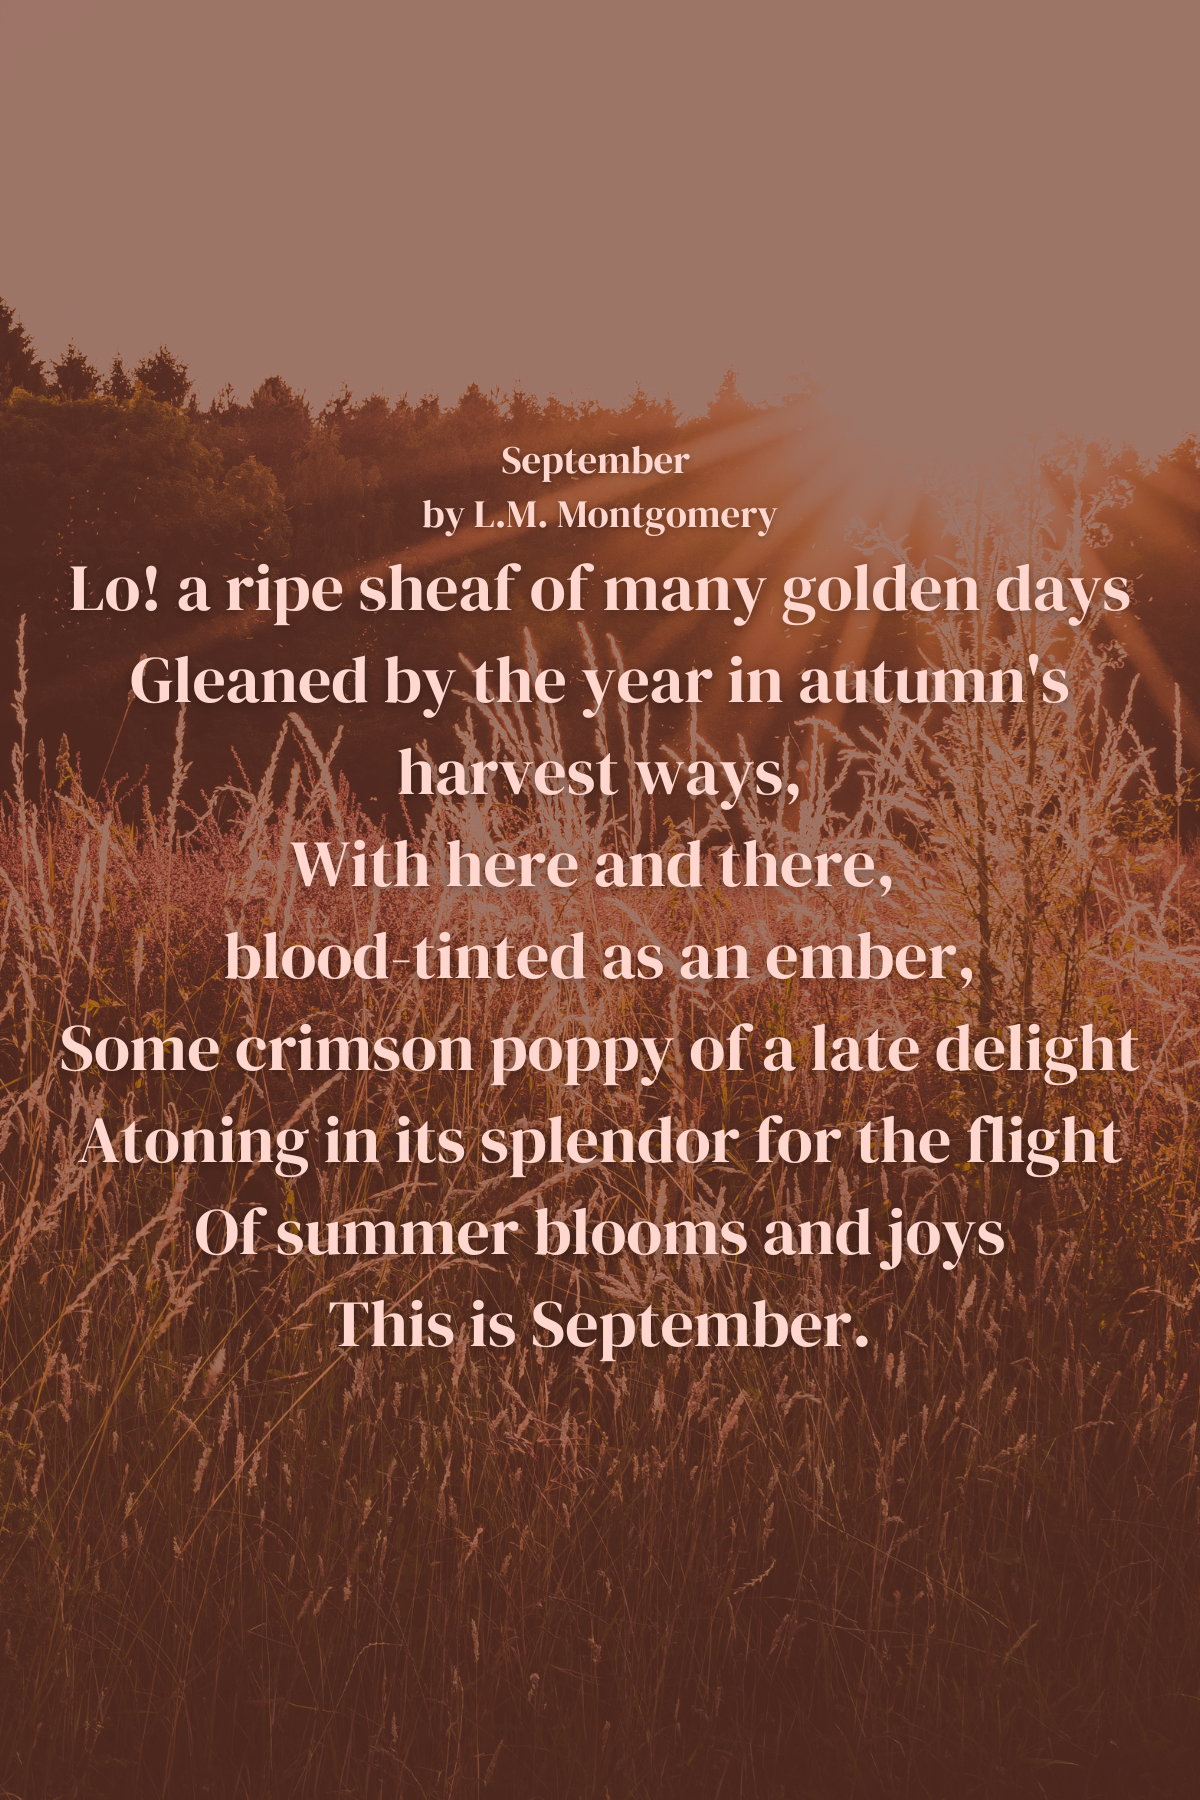 Golden fall days poem by L.M. Montgomery